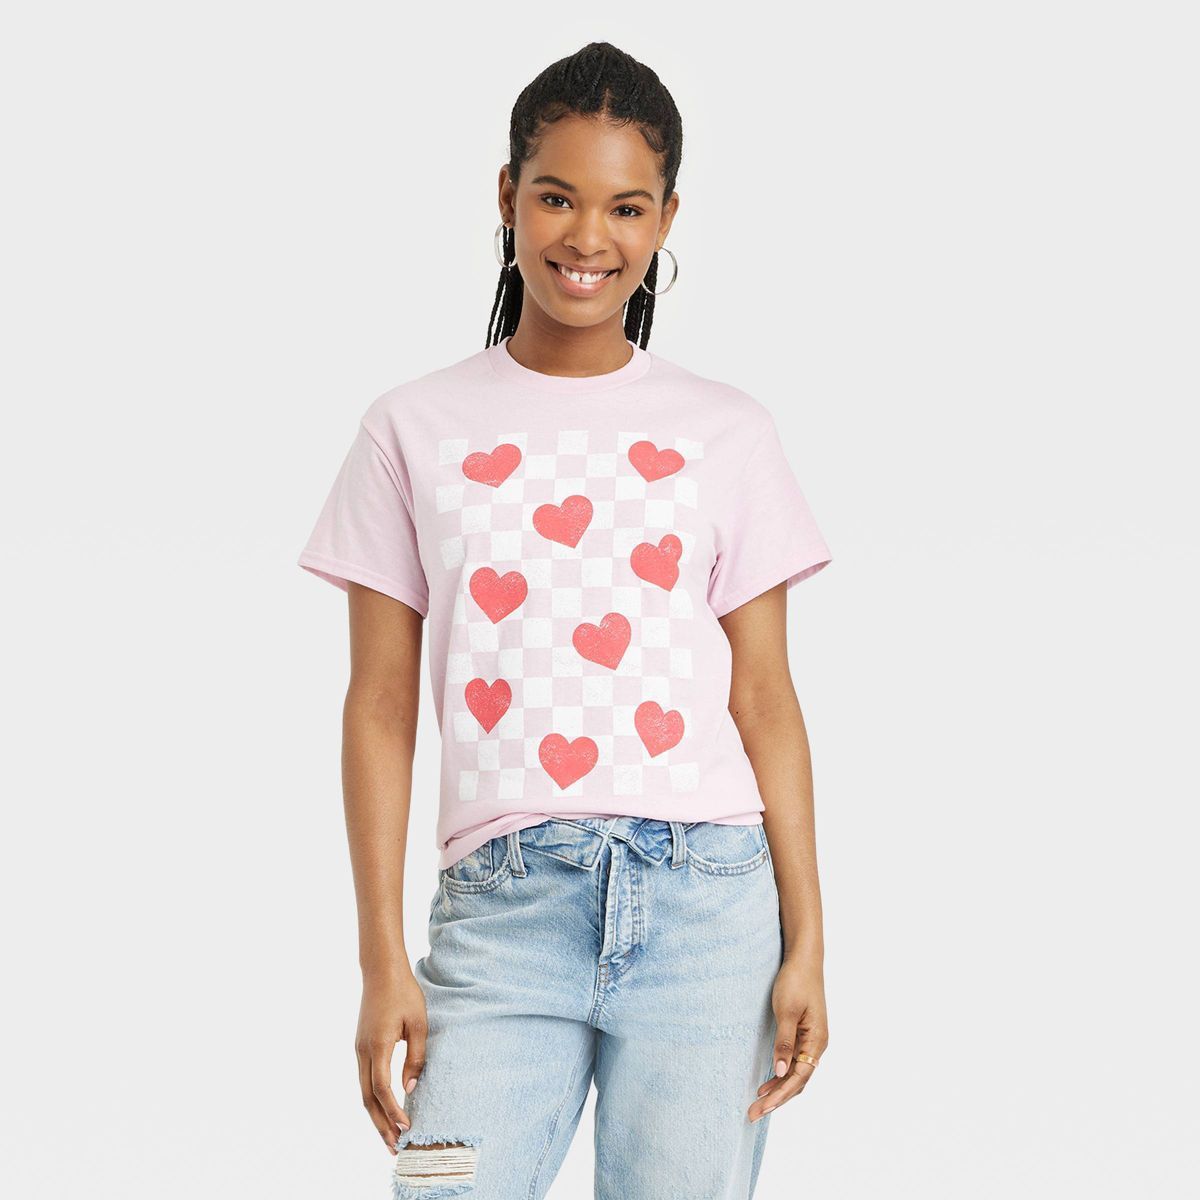 Shop this collection | Target